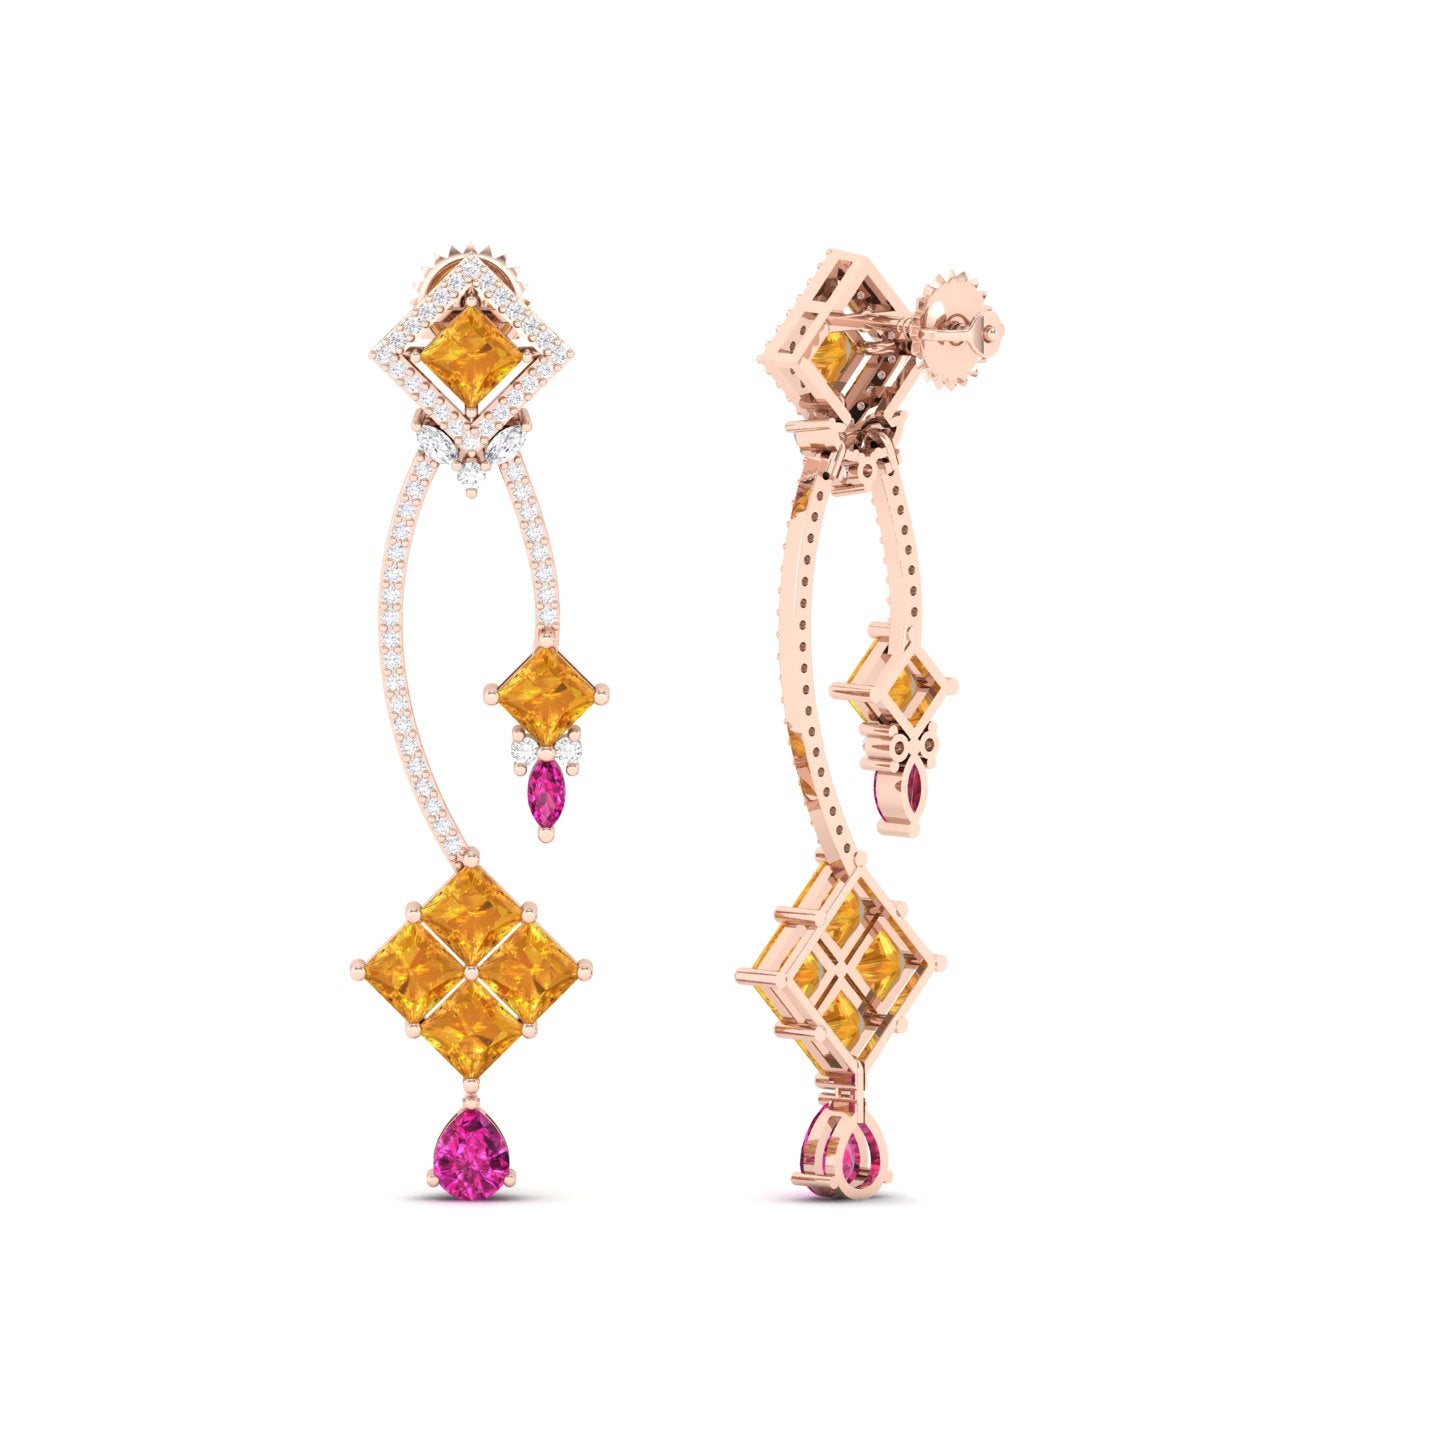 Discover 75 earrings on palazzo best  3tdesigneduvn